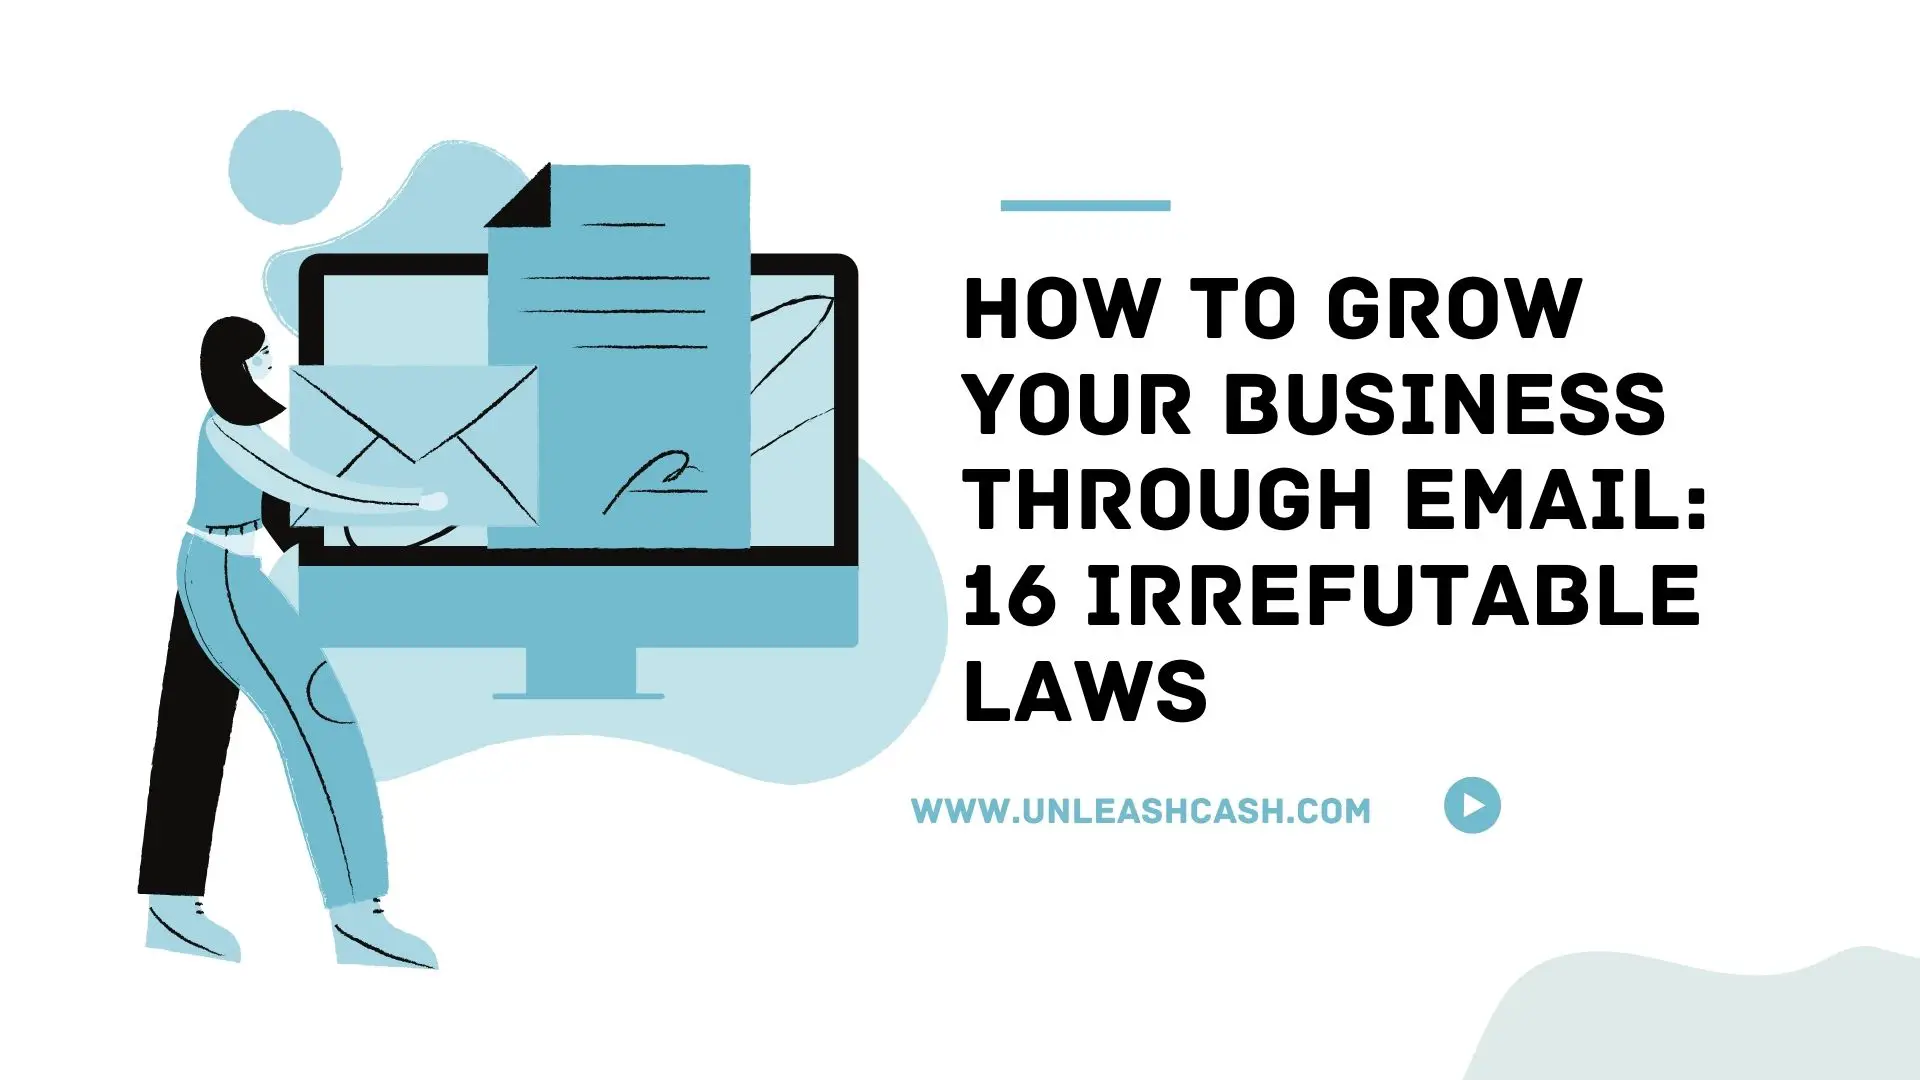 How To Grow Your Business Through Email: 16 Irrefutable Laws